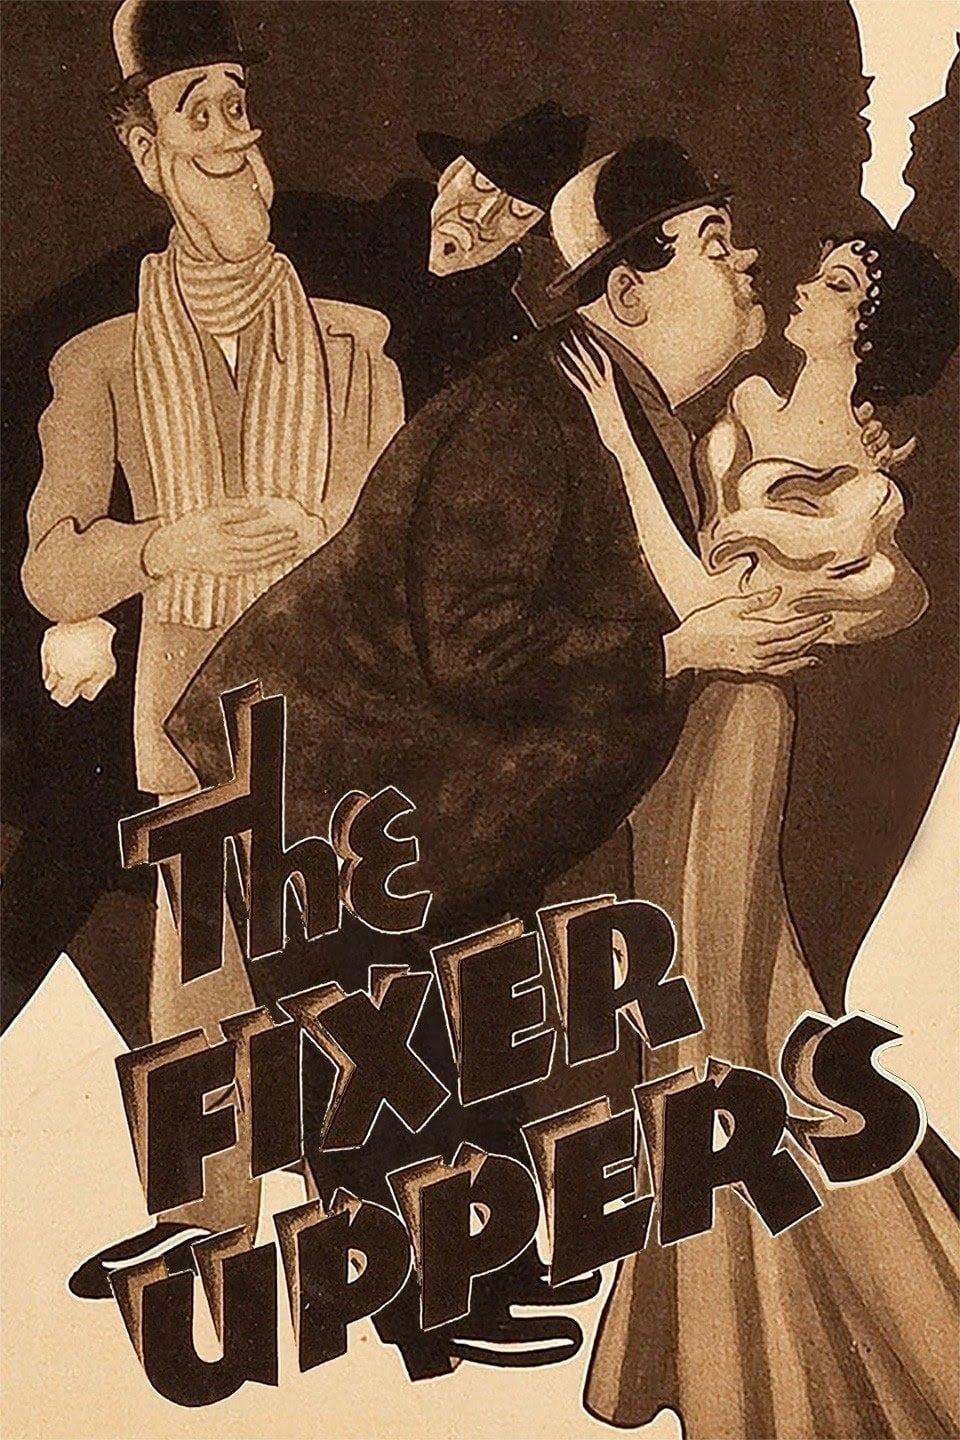 The Fixer Uppers poster